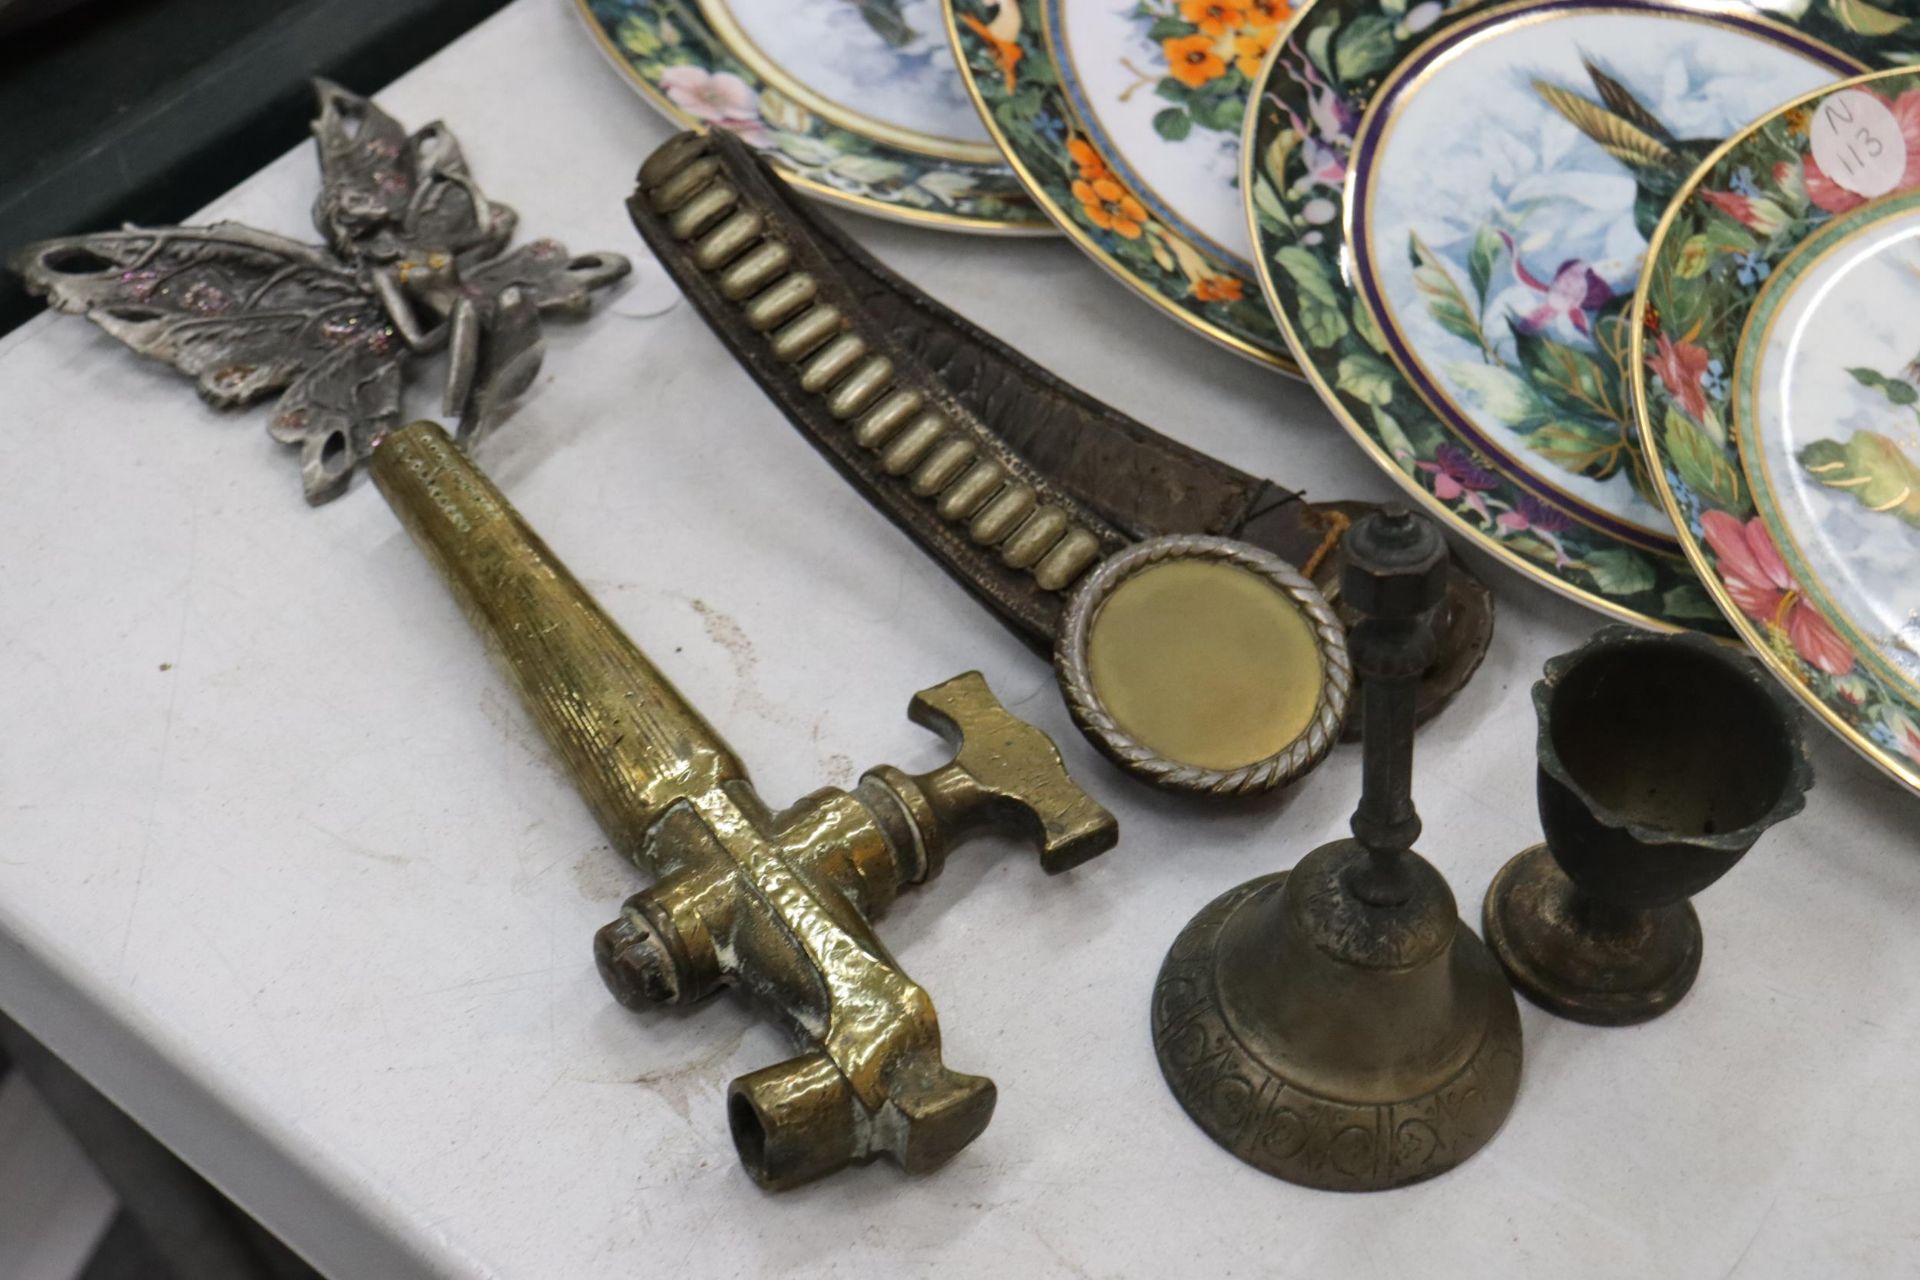 A QUANTITY OF VINTAGE BRASS ITEMS TO INCLUDE A TAP, BELL, GOBLET, FAIRY, ETC